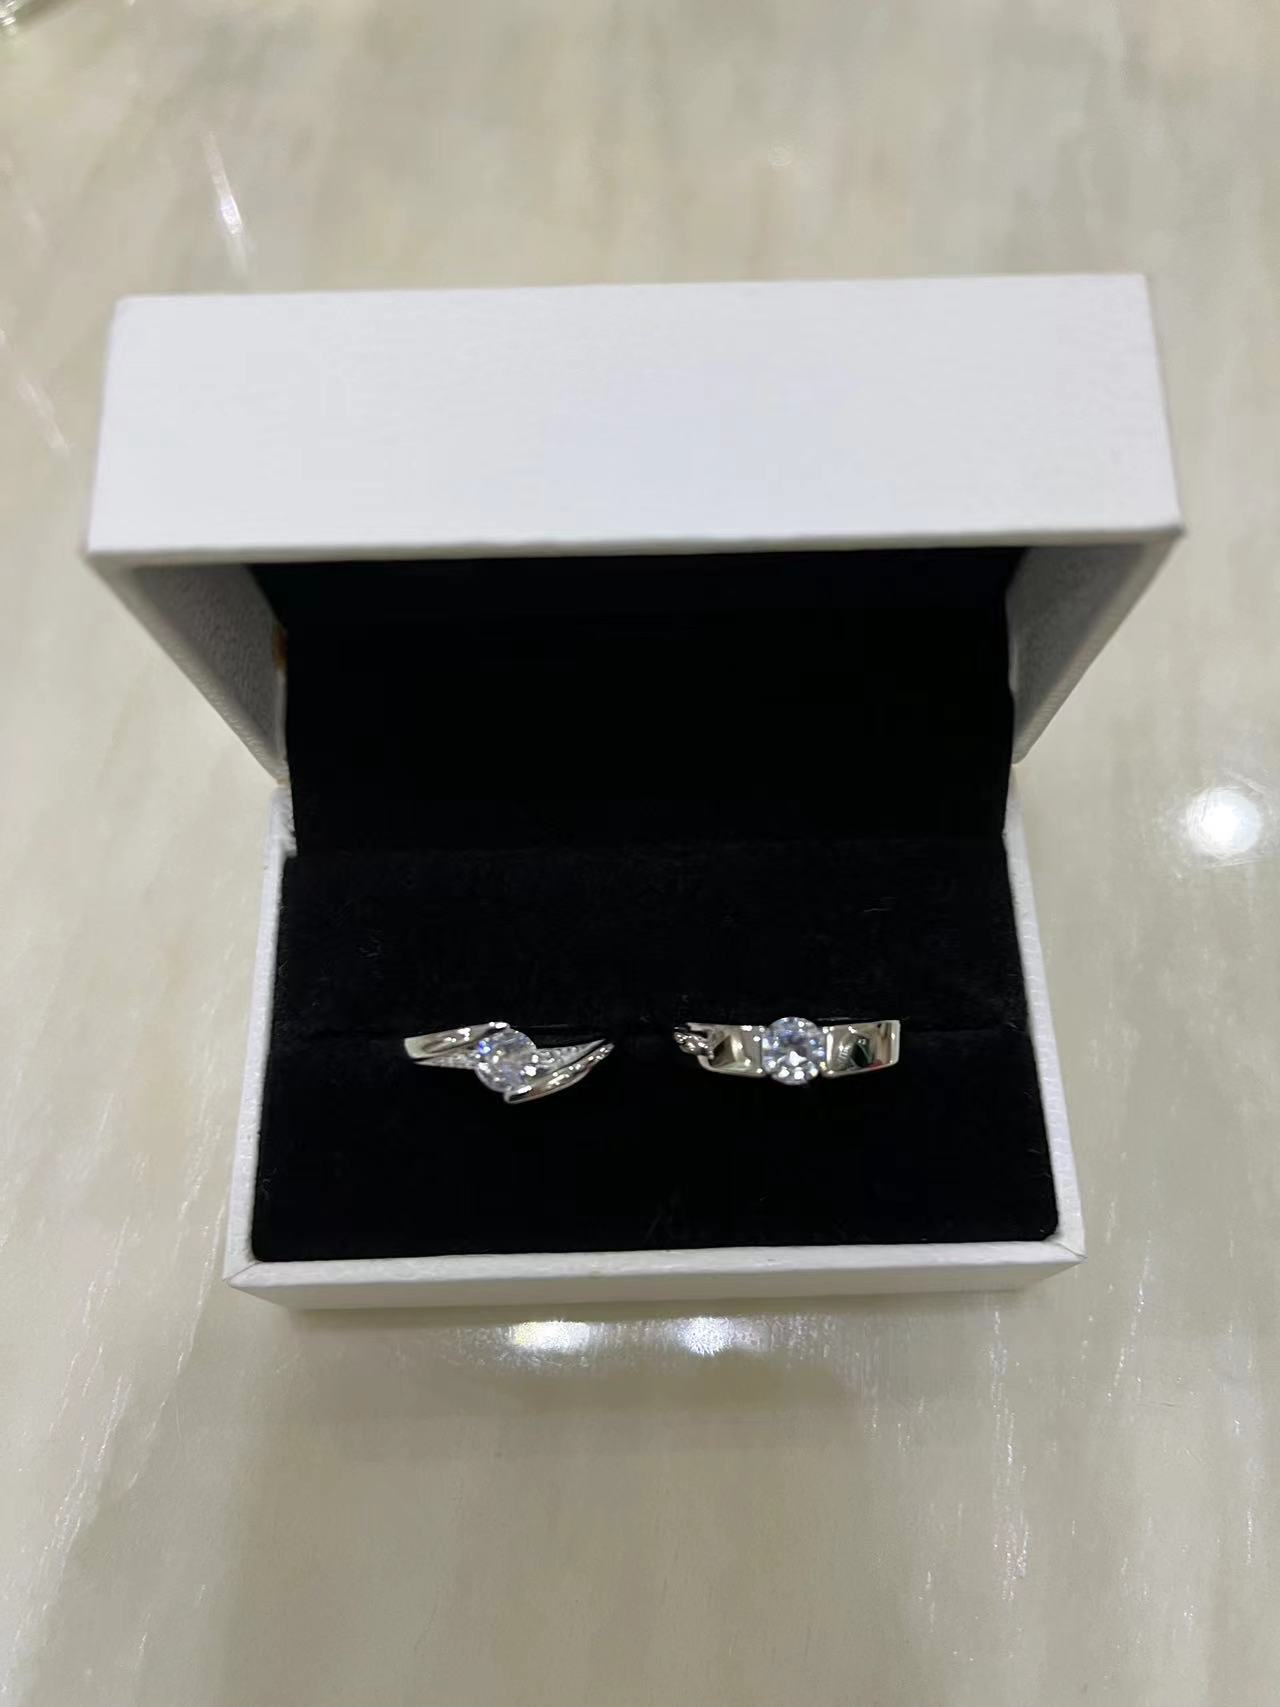 Reviews: Cheap Wedding Rings Sets for Him and Her - JewelryEva